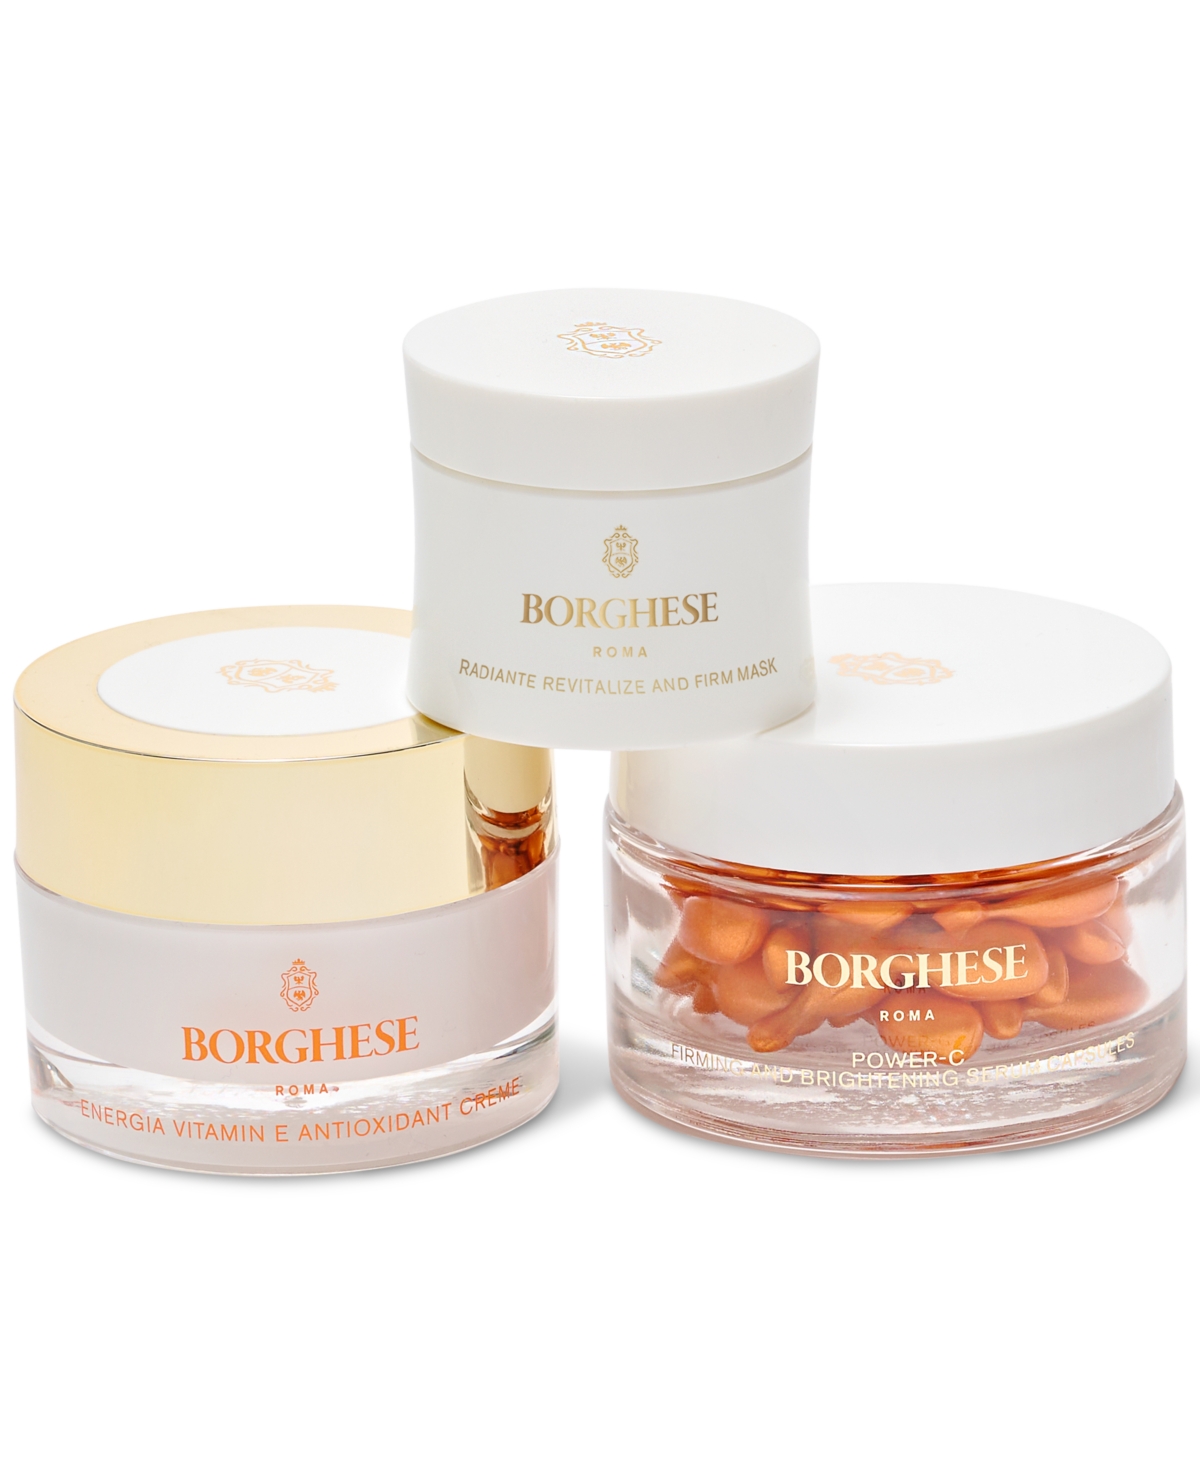 Shop Borghese 3-pc. Best In Brightening Skincare Set In No Color